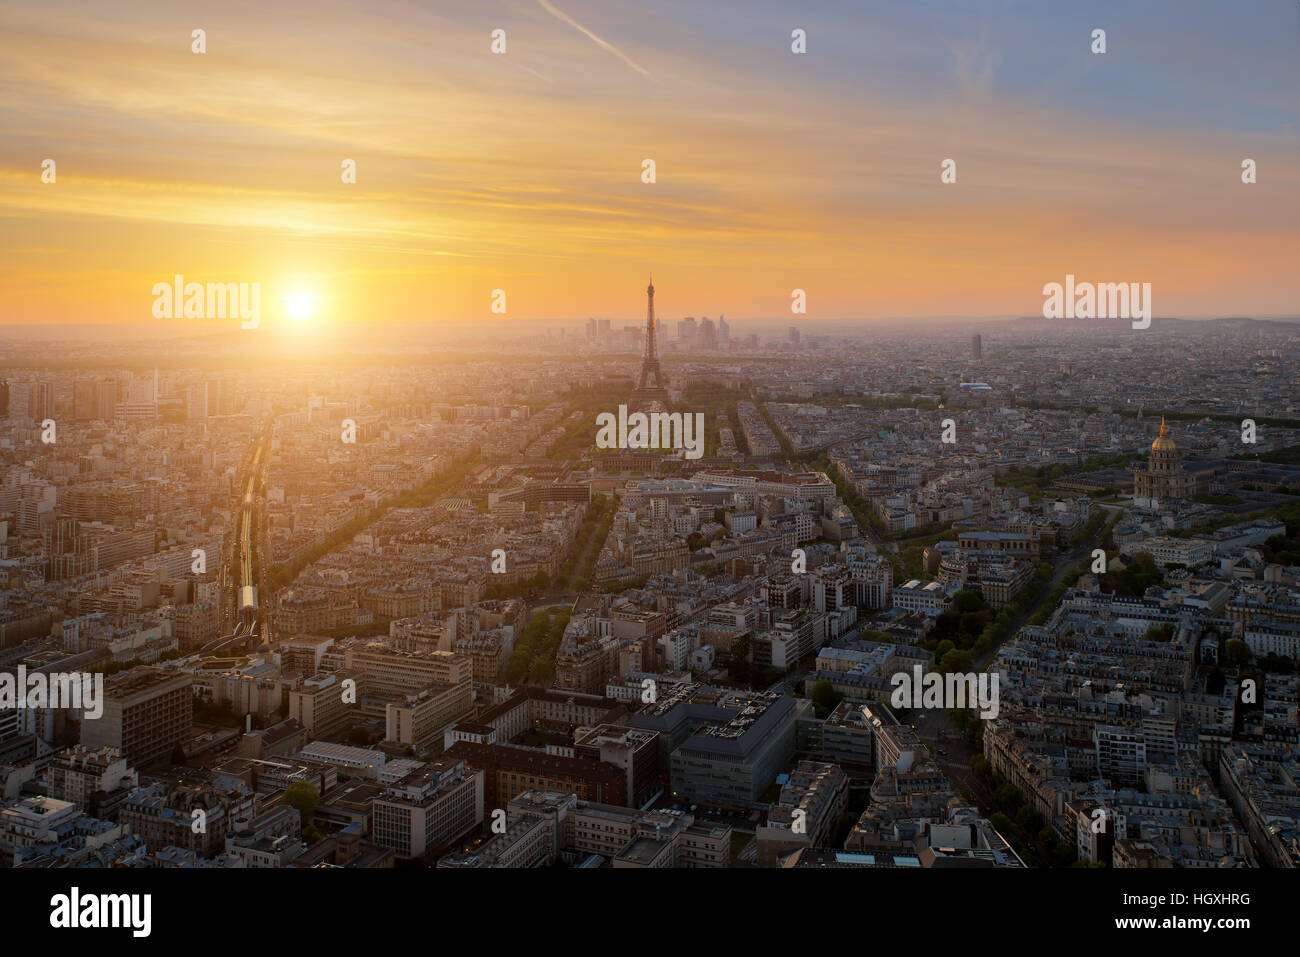 Aerial view of Paris skyline with Eiffel Tower at sunset in Paris, France. Stock Photo